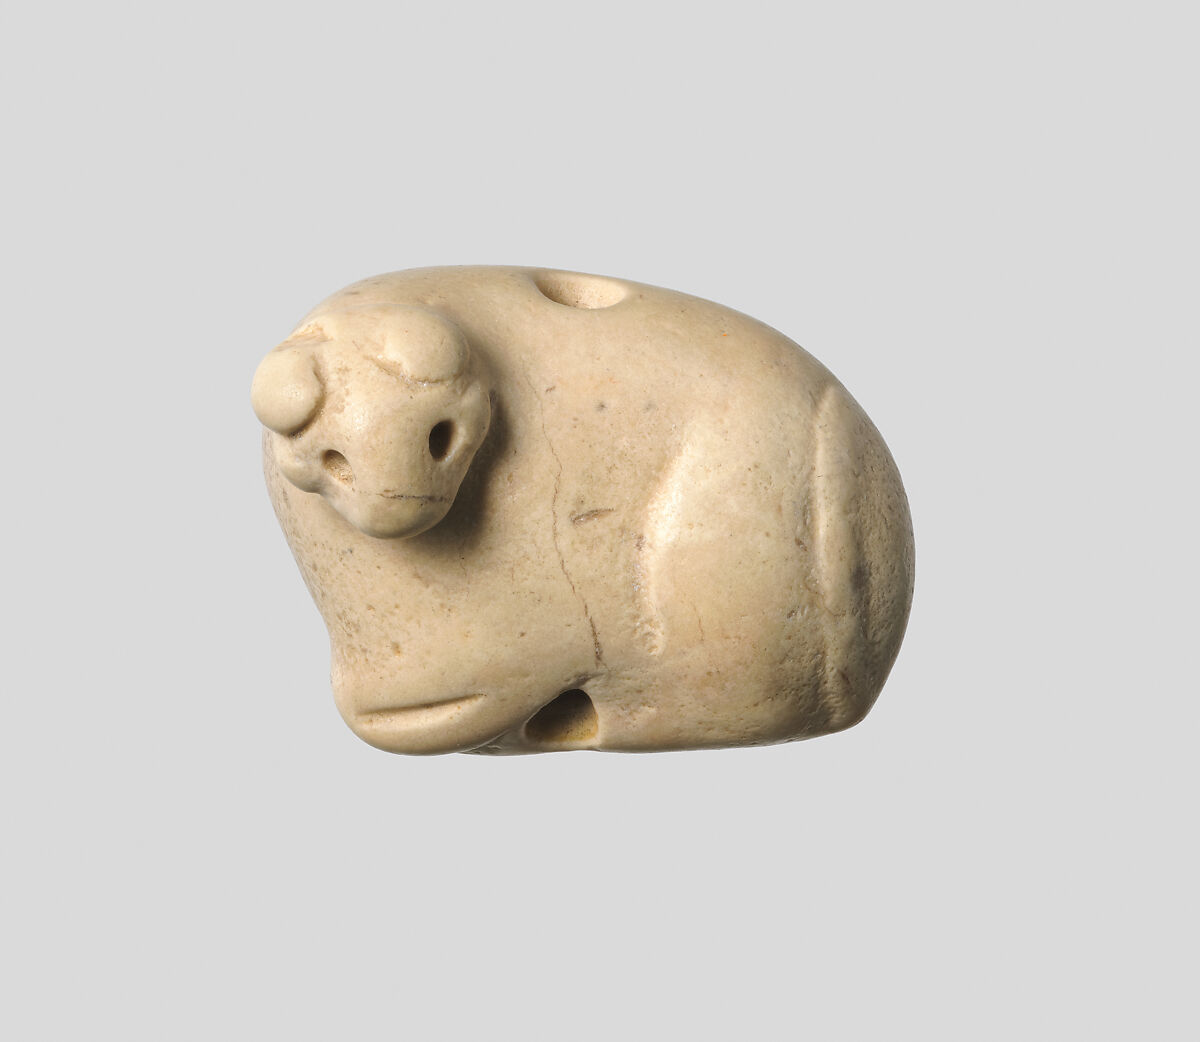 Seal amulet in the form of a recumbent bovid, Stone, cream colored 